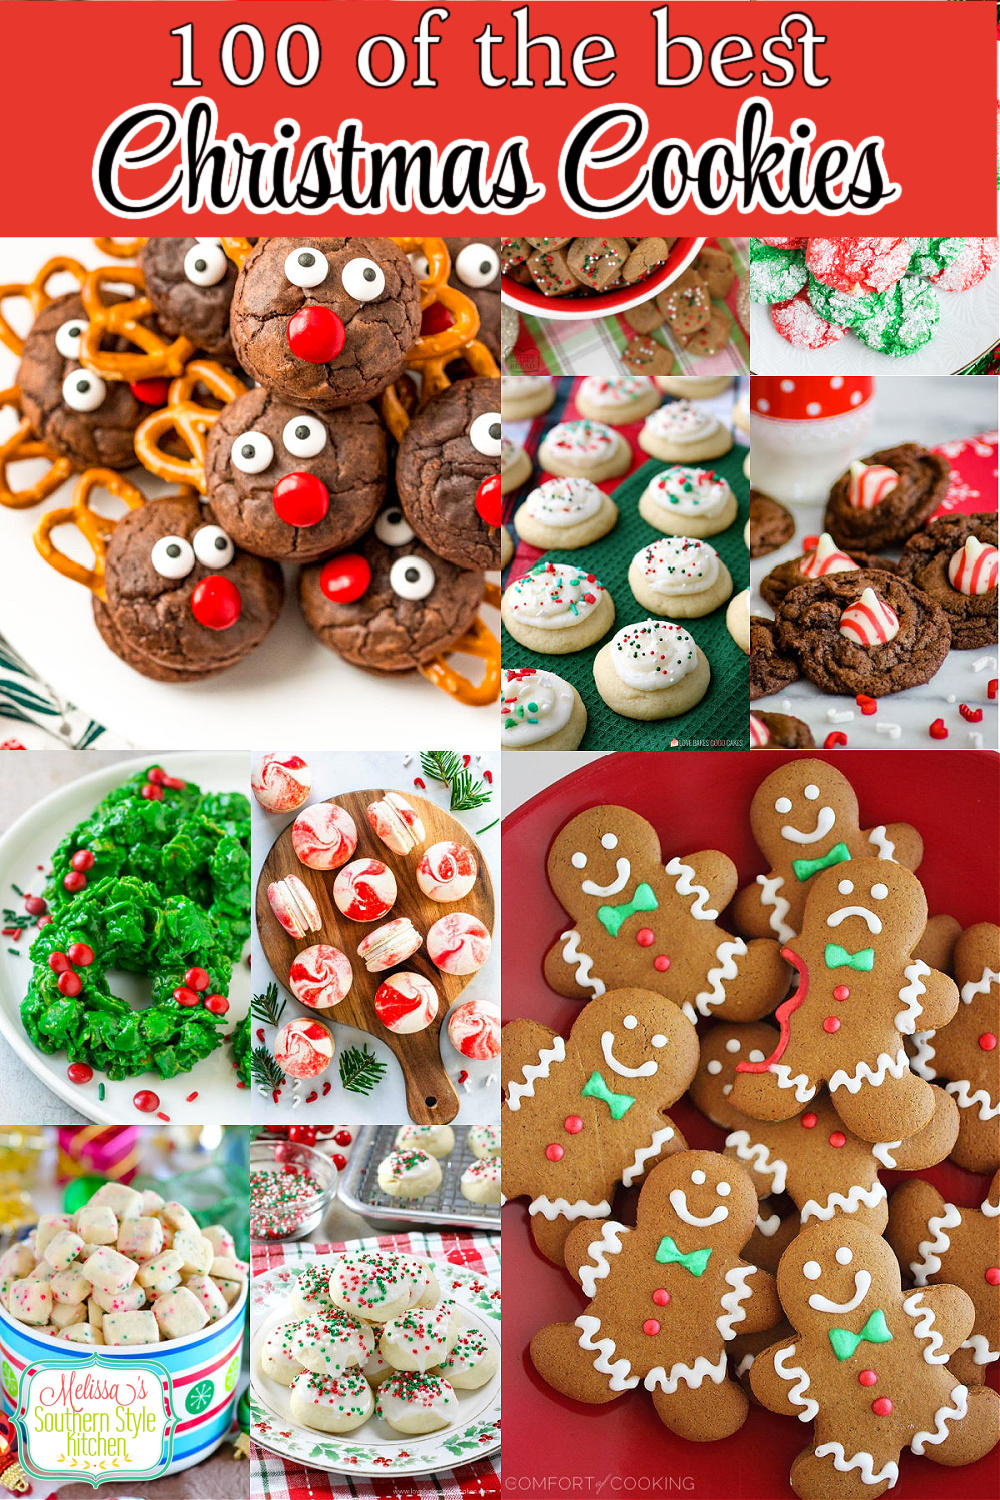 Kick off the holiday season and host a Virtual Cookie Swap with this collection of 100 of the Best Christmas Cookies #christmascookies #cookierecipes #cookieswap #virtualcookieswap #bestcookierecipes #100bestchristmascookies #cookies #holidaybaking #desserts #dessertfoodrecipes